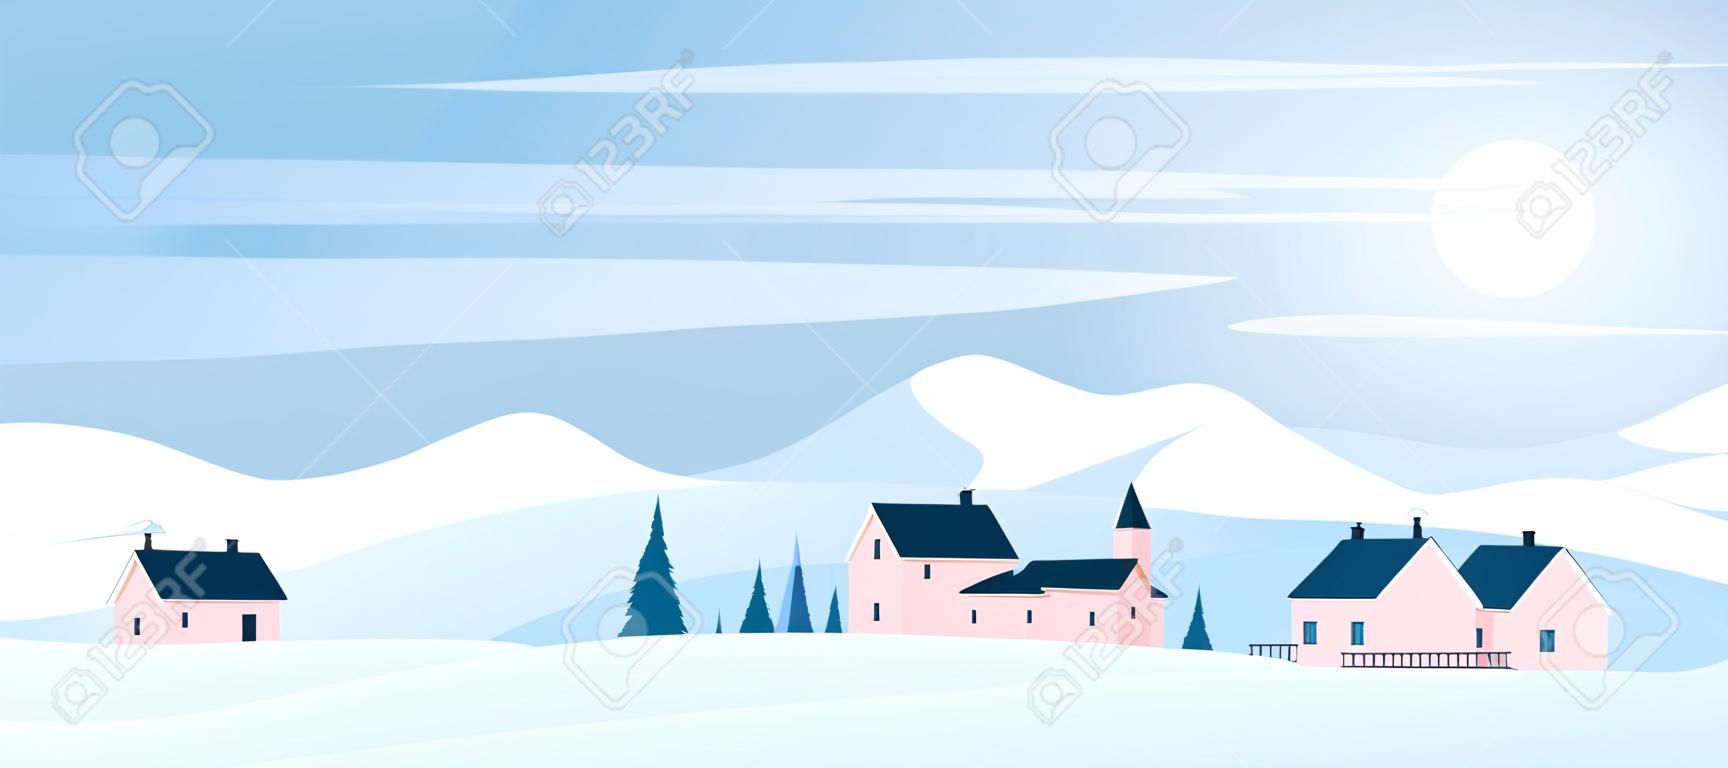 Winter Christmas countryside landscape with mountains and hills covered with snow vector illustration. Cartoon sunny nature scenery with houses of European village, forest and trees in simple design